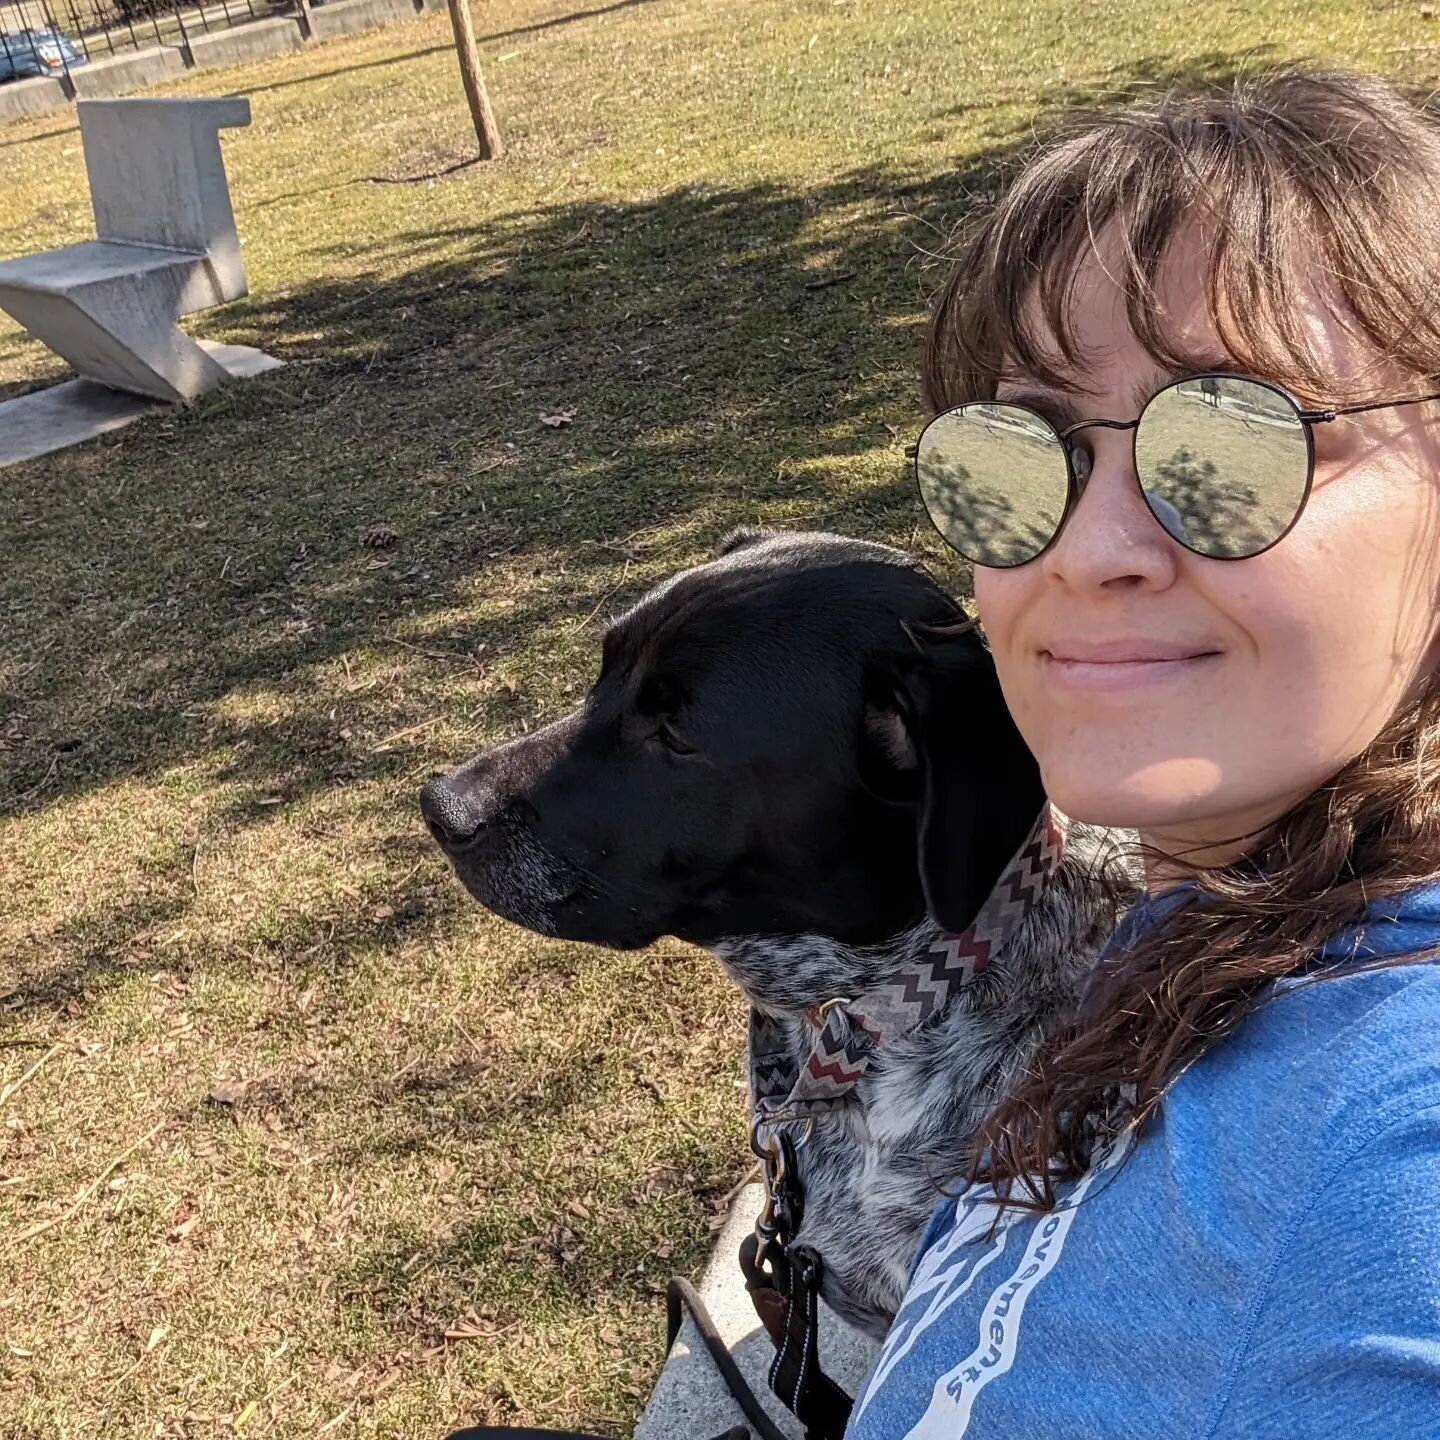 Enjoyed the weather today with my pup Sauce Boss! We got out to work on neutrality for a bit 😎